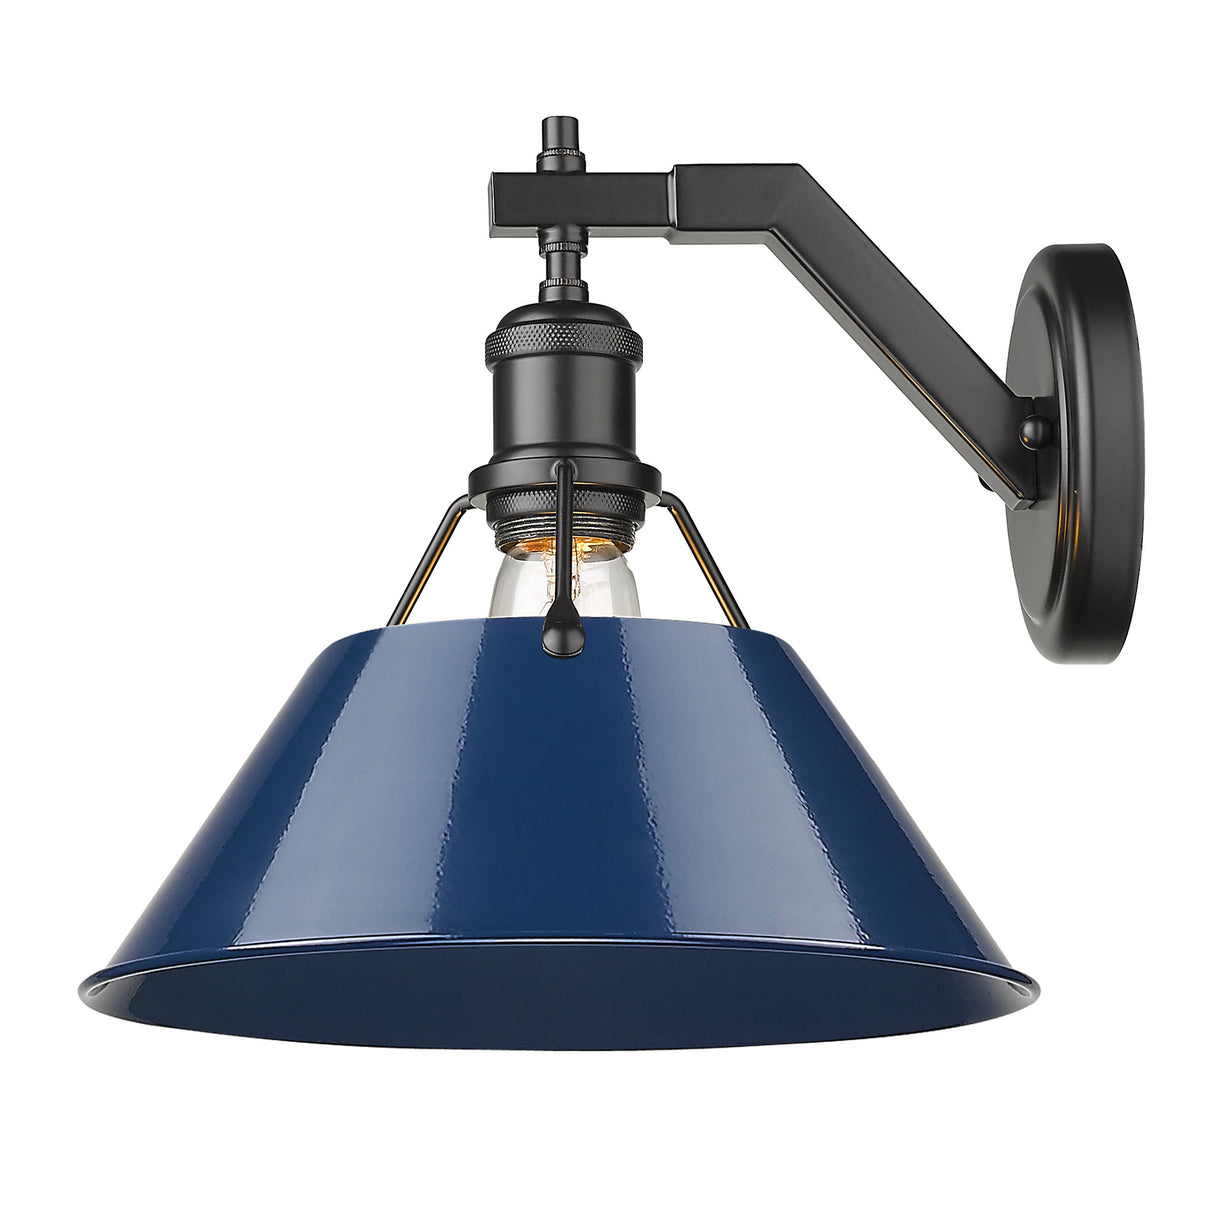 Orwell BLK 1 Light Wall Sconce in Matte Black with Navy Blue Shade